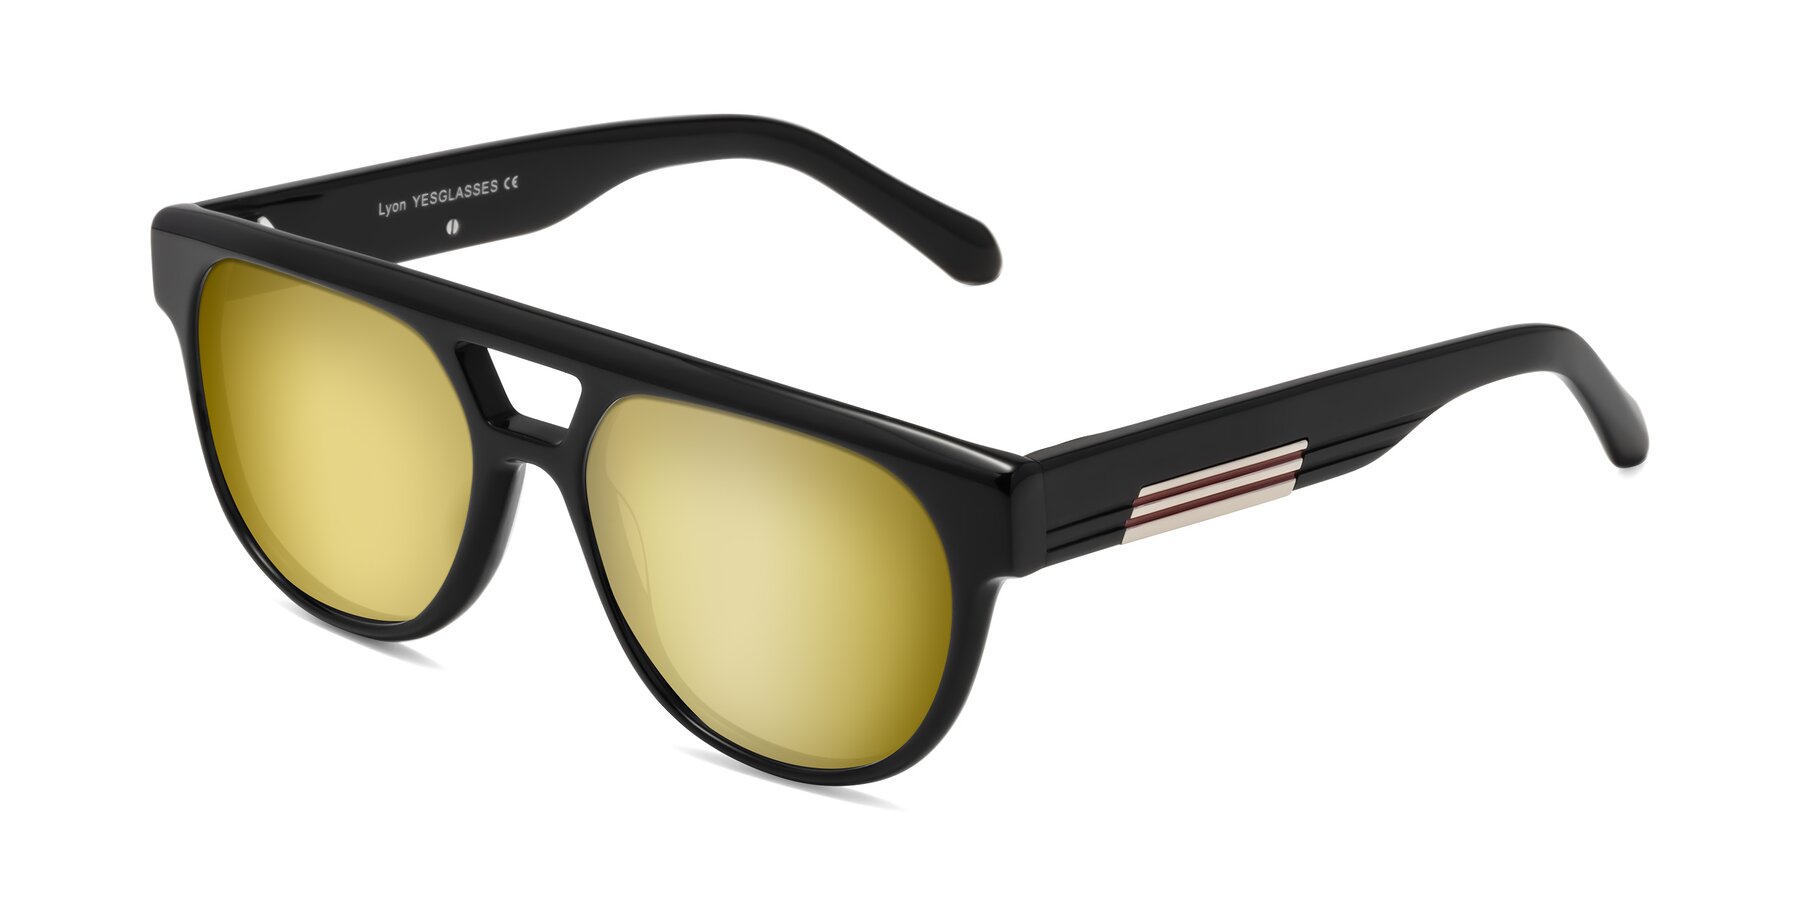 Angle of Lyon in Black with Gold Mirrored Lenses